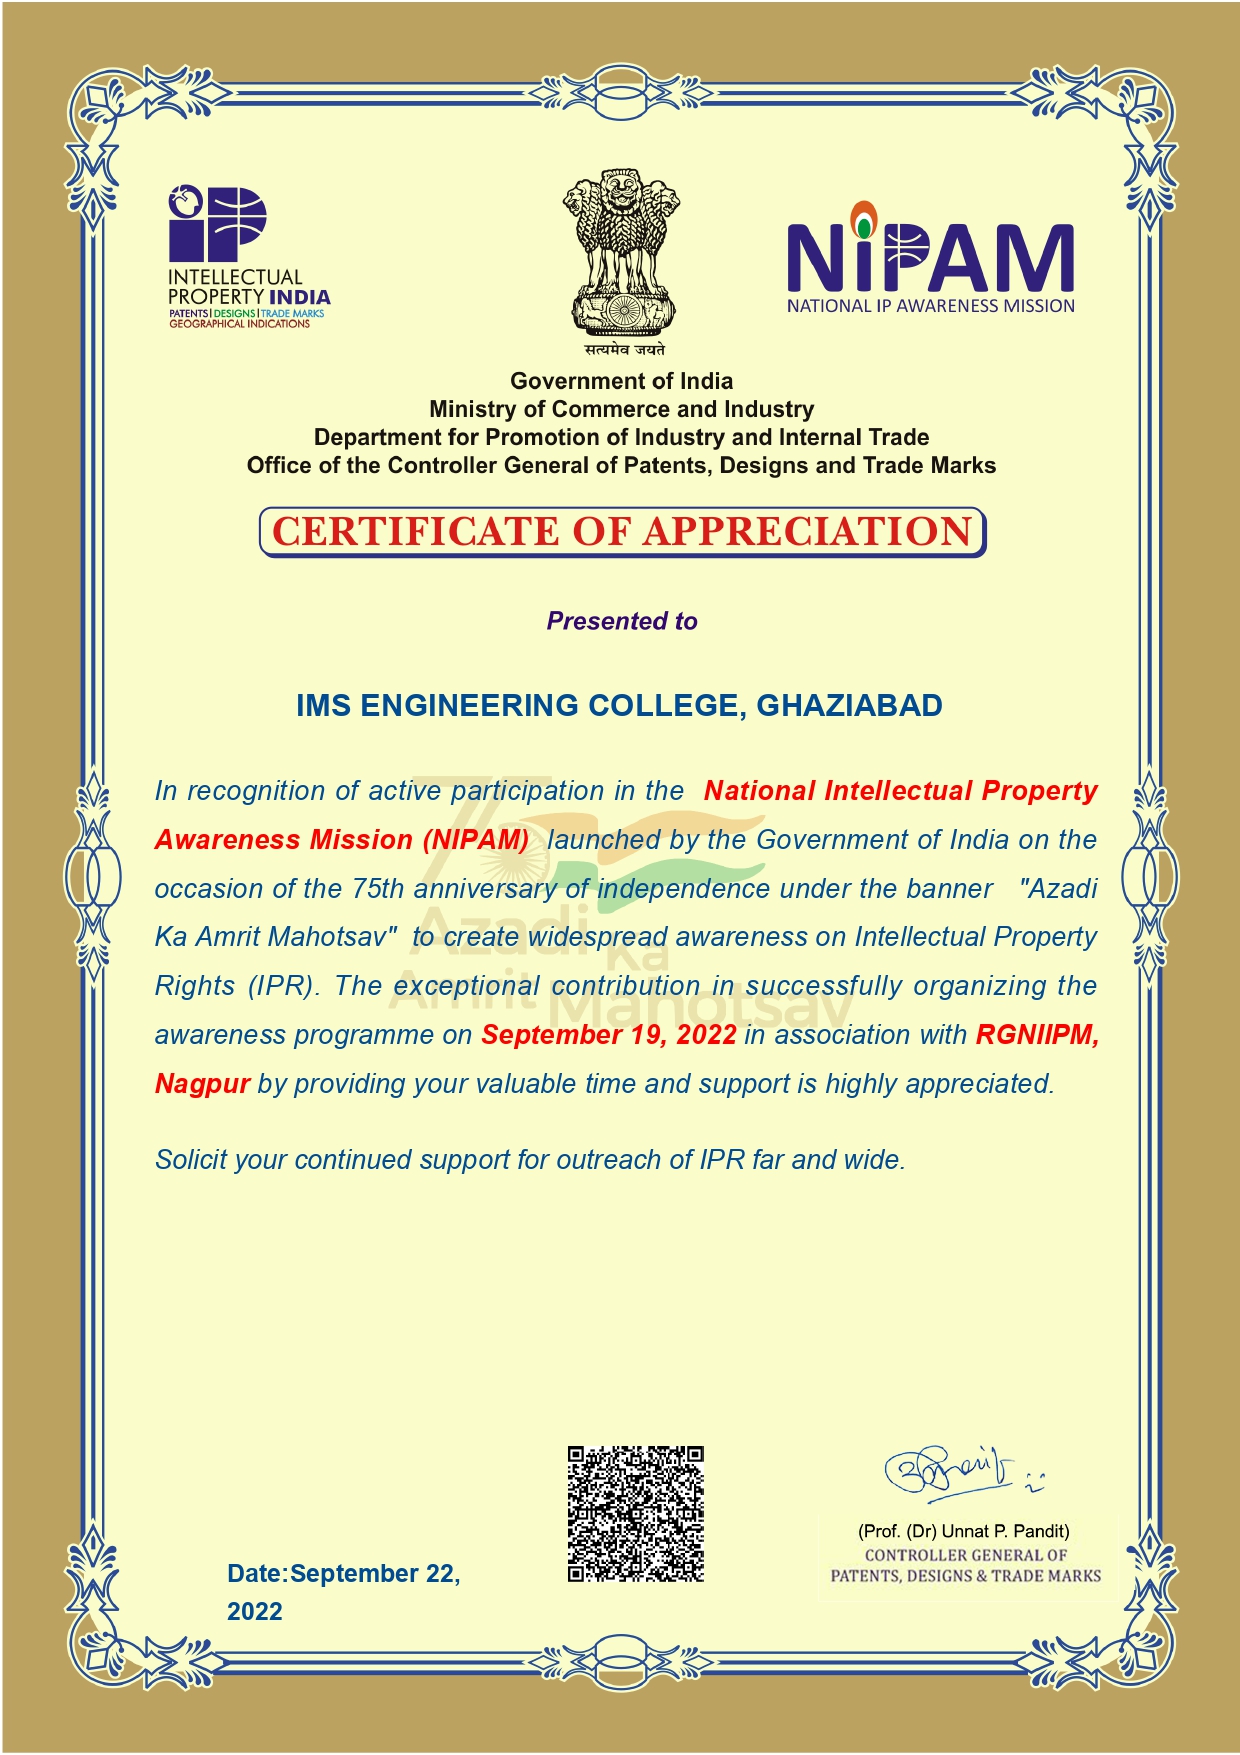 Appreciation Certificate for active participation in the National Intellectual Property Awareness Mission (NIPM)